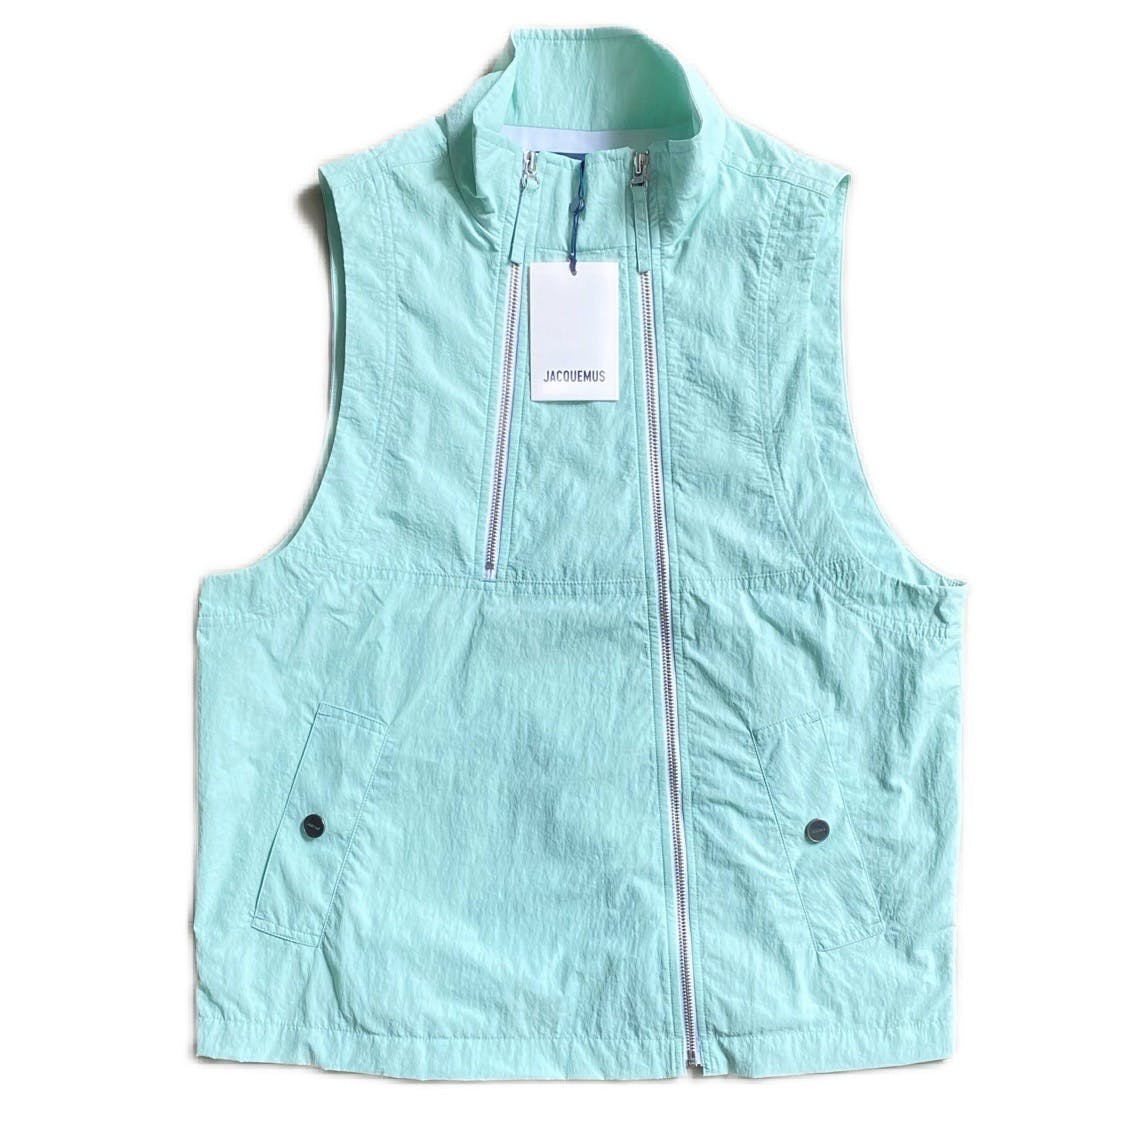 New With Tag SS22 Le Splash Gilet - 1